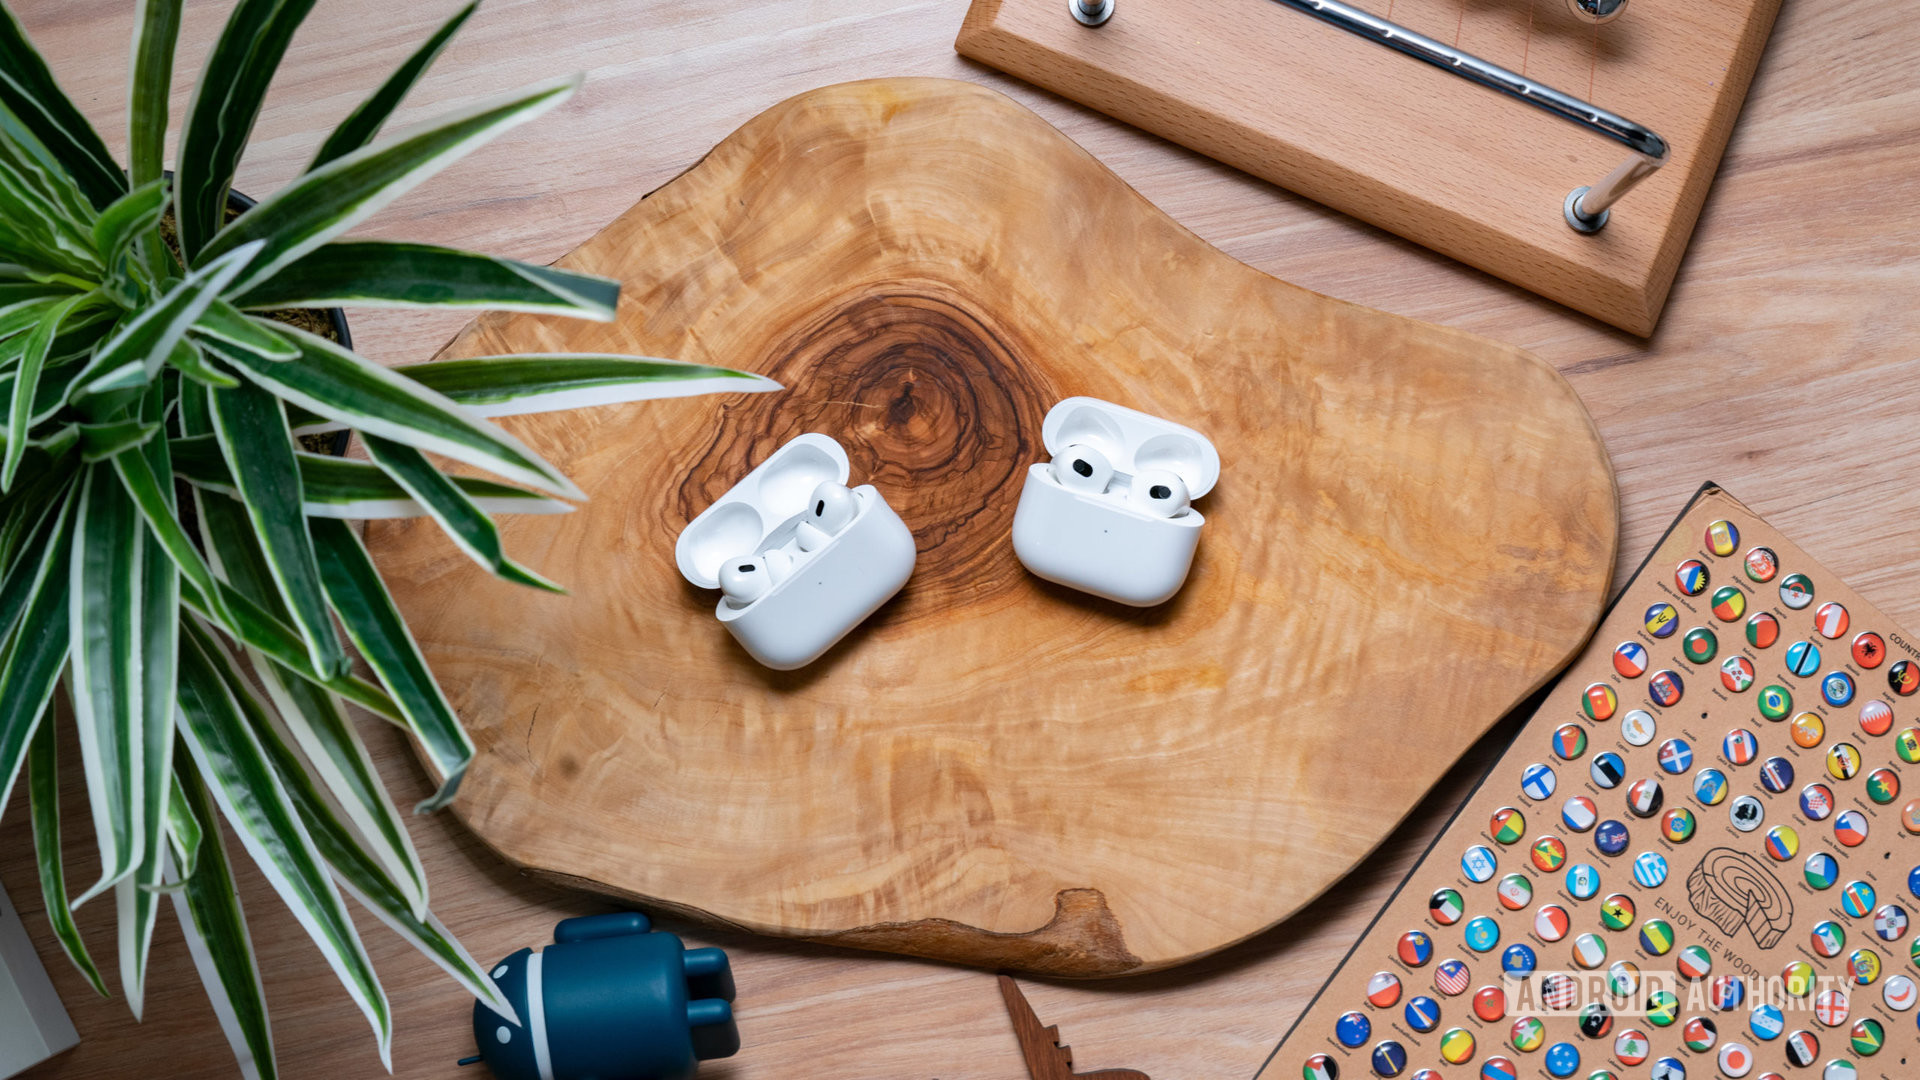 Apple Airpods Pro 2nd generation vs Apple Airpods 3rd generation hero case comparison